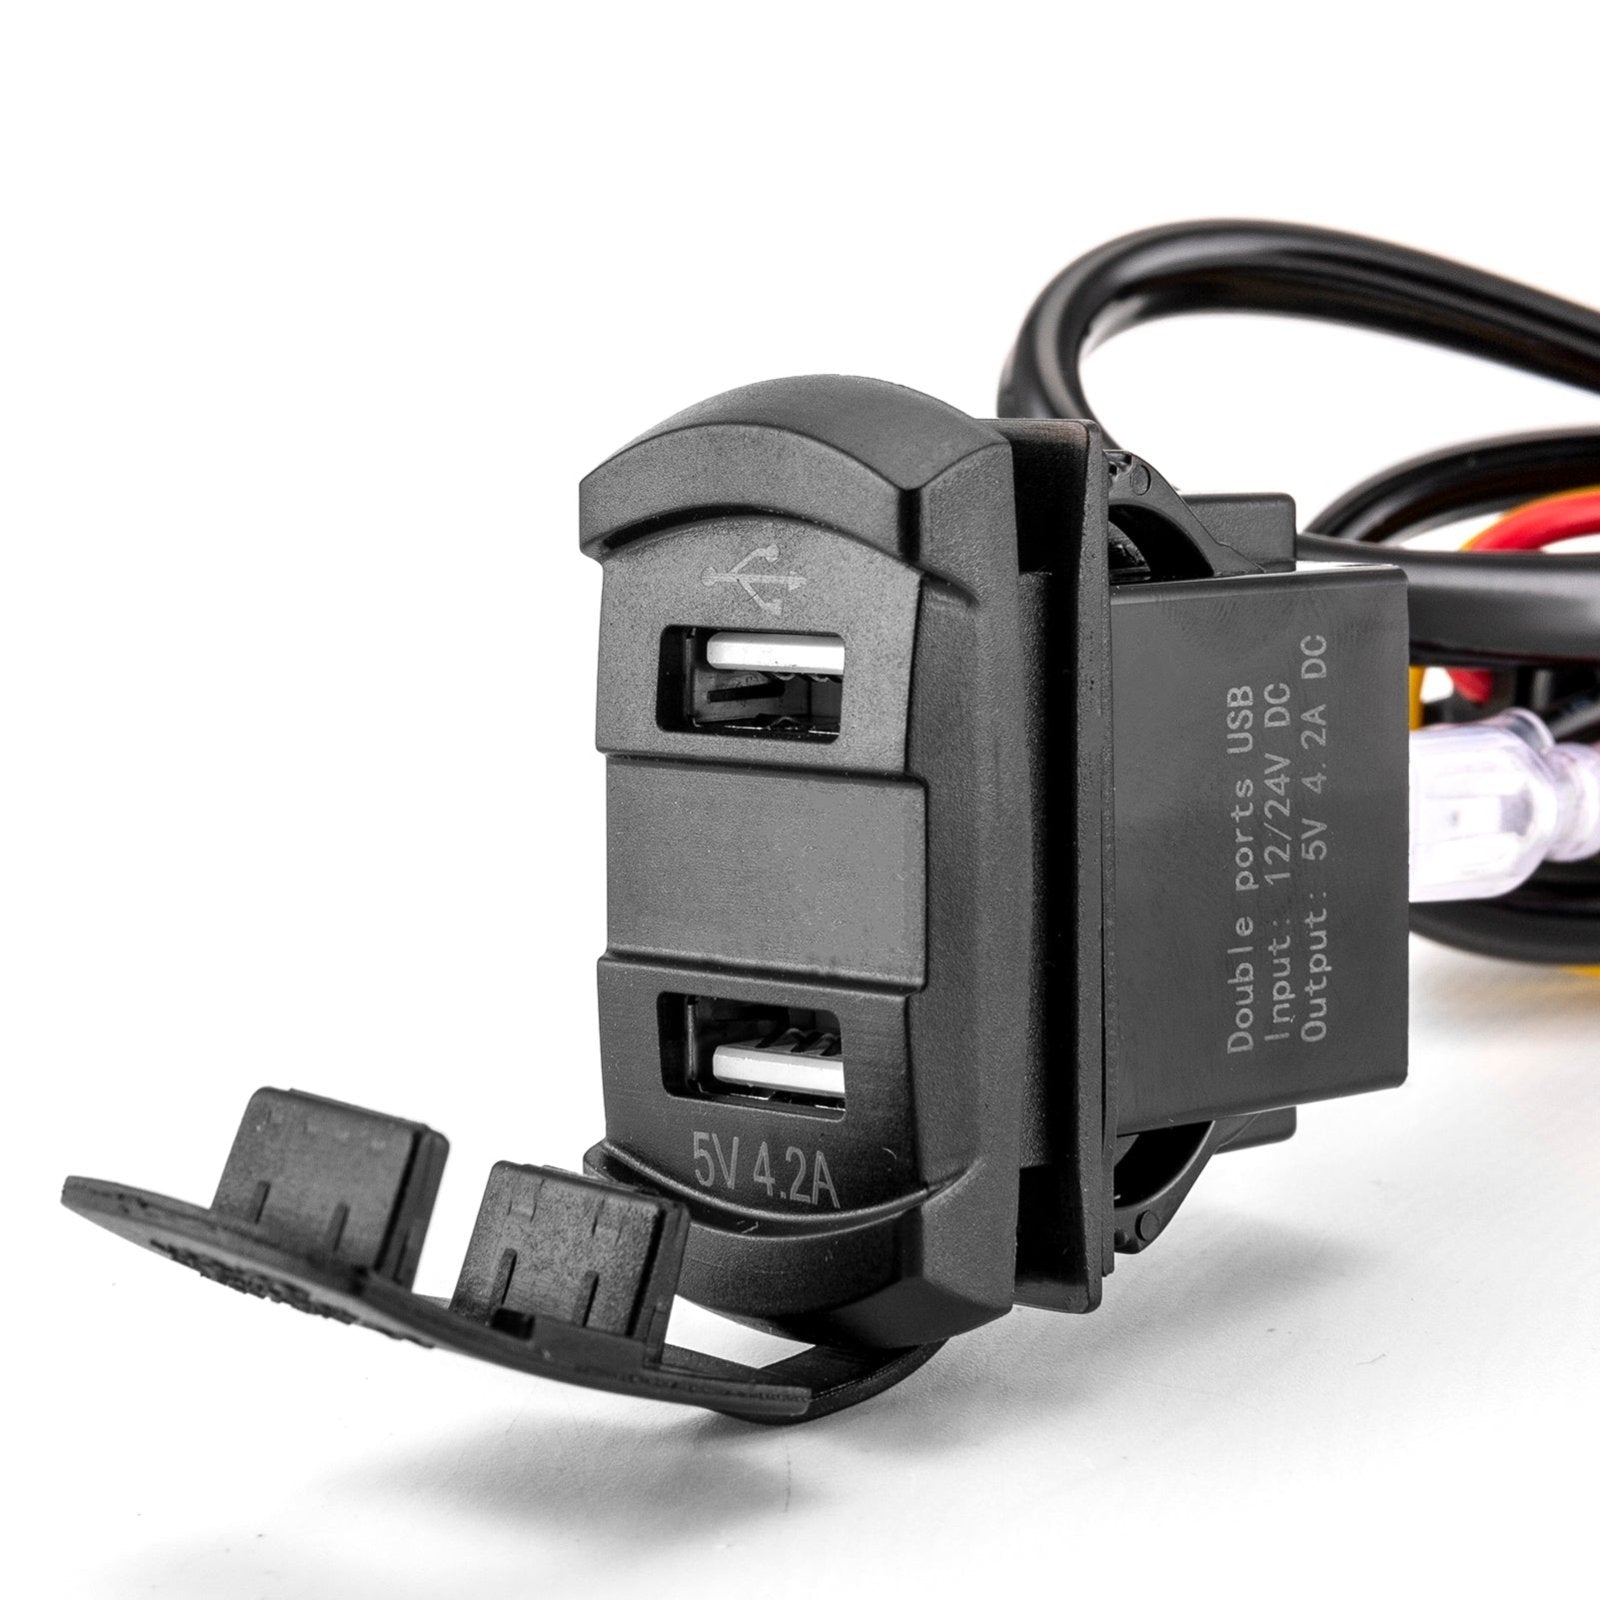 Polaris RZR PRO XP / PRO R USB Rocker Switch 12v Dual Charger Wire Harness w/ Pulse Power Bar Plug Connector - Weisen